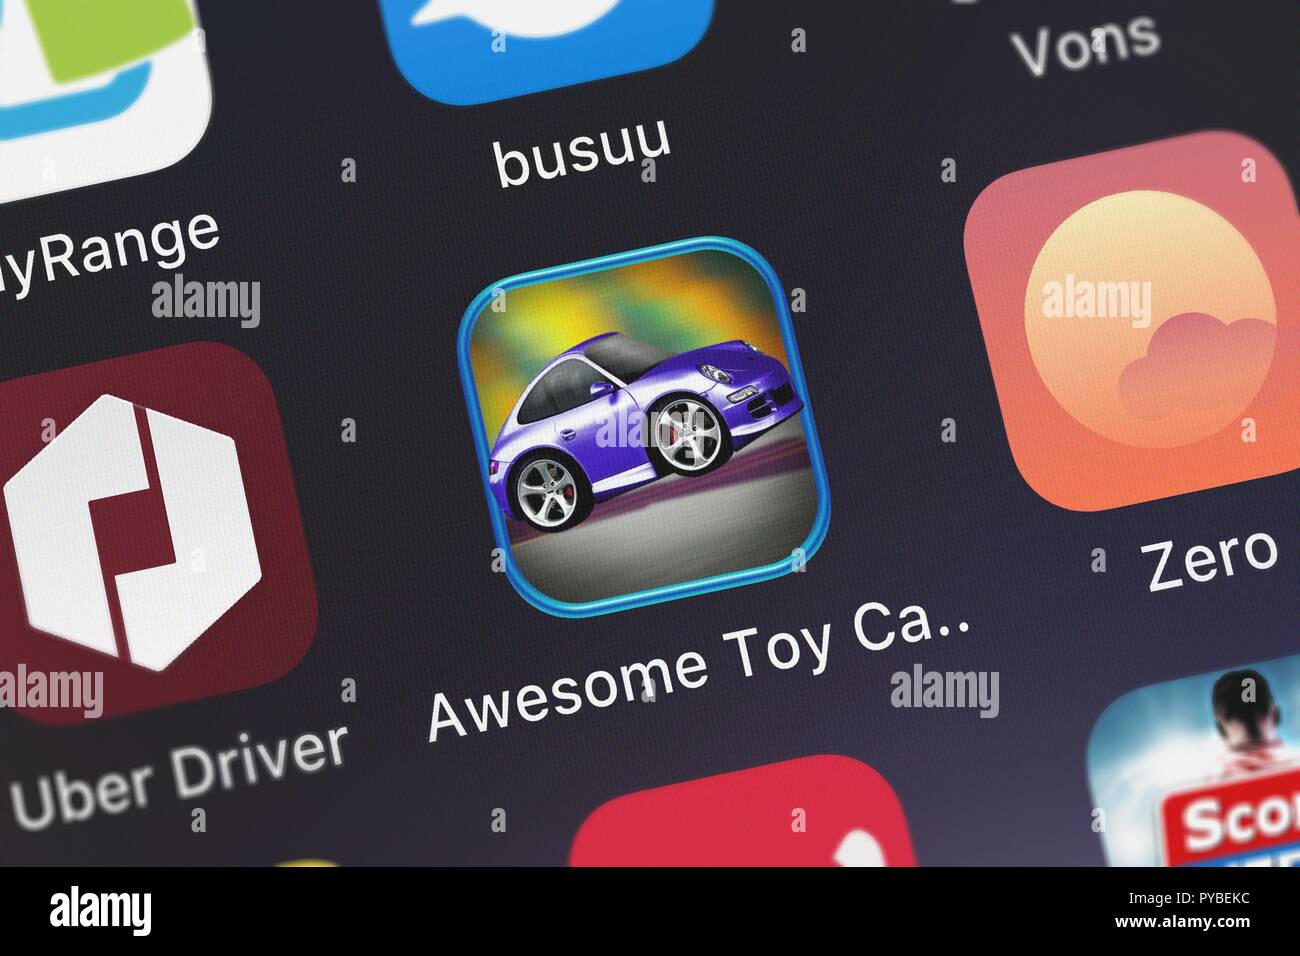 free games for boys car racing